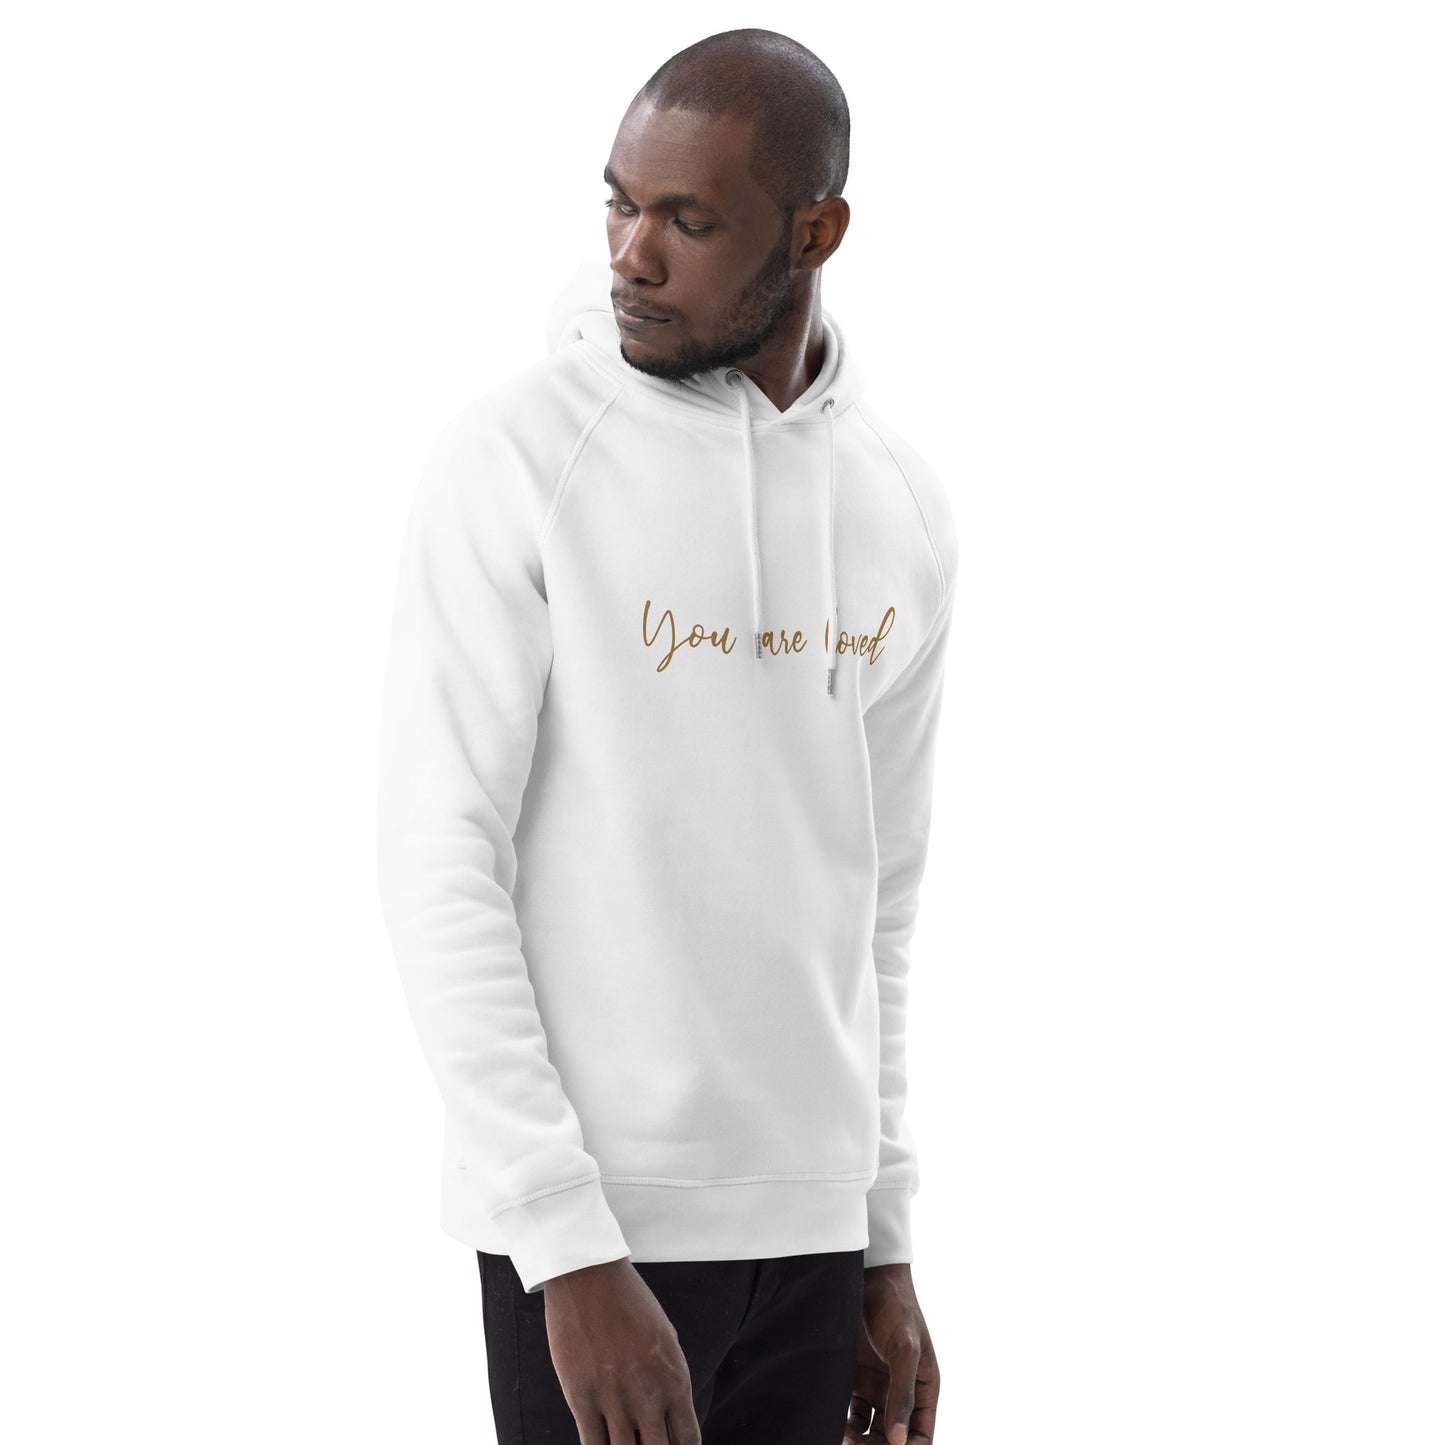 You Are Loved Men's Organic Cotton Hoodie